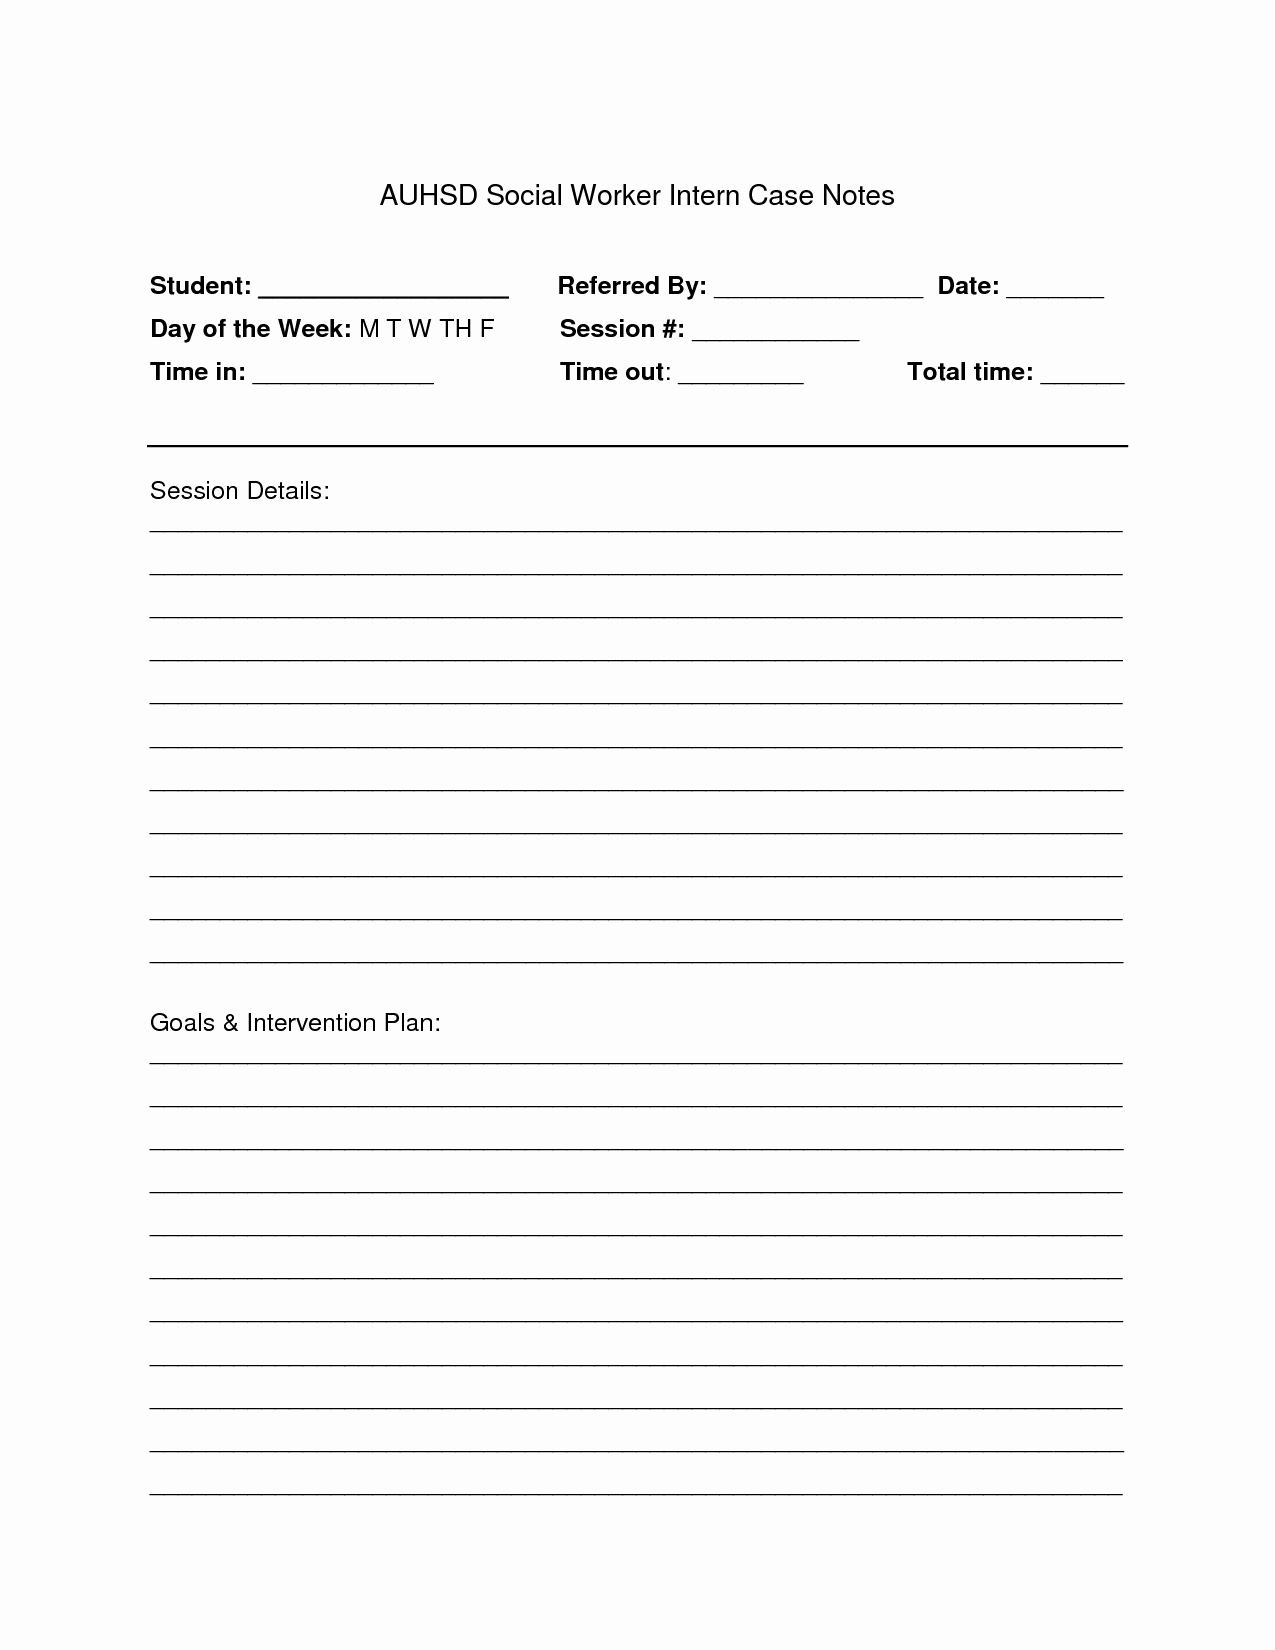 Case Note Template social Work New 10 Best Of Case Note form Case Management Notes